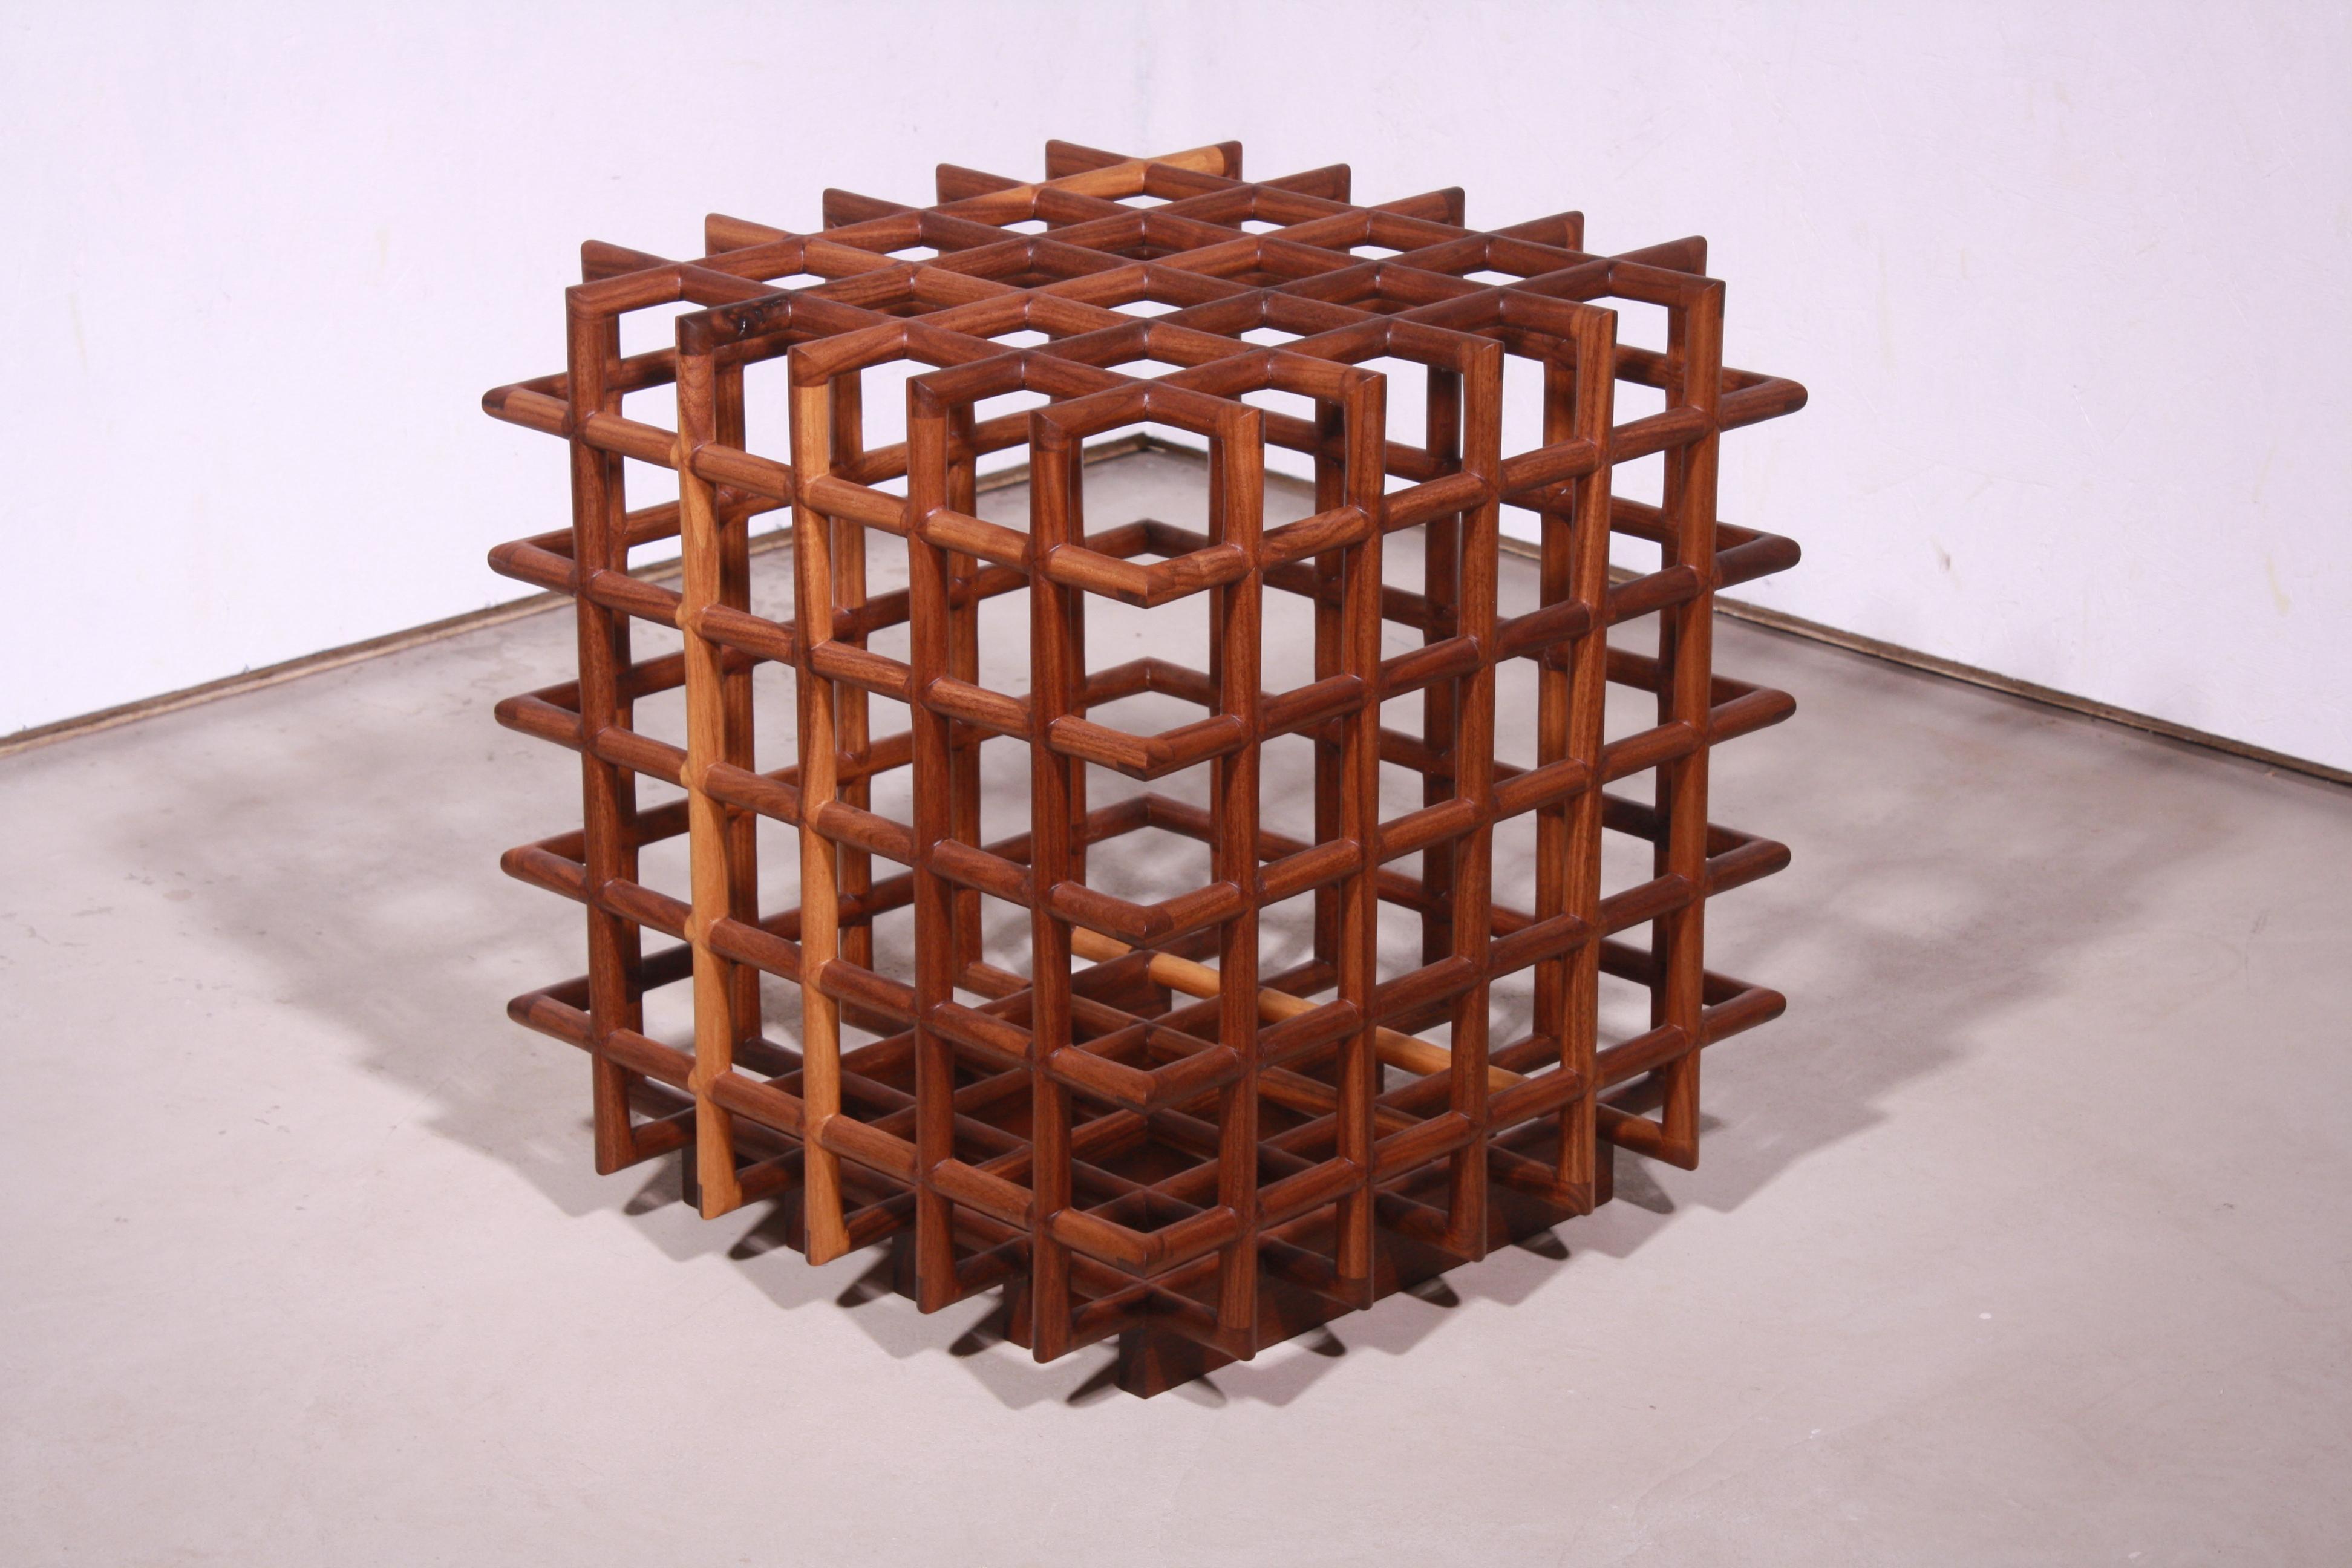 hand-carved, joined, sanded and oiled walnut lattice

approx. 1.5 cubic feet of volume

Perpetually unfinished, our wooden vessel is simultaneously closed and porous, able to clutch a few lemons but not contain them.  It is an object that questions